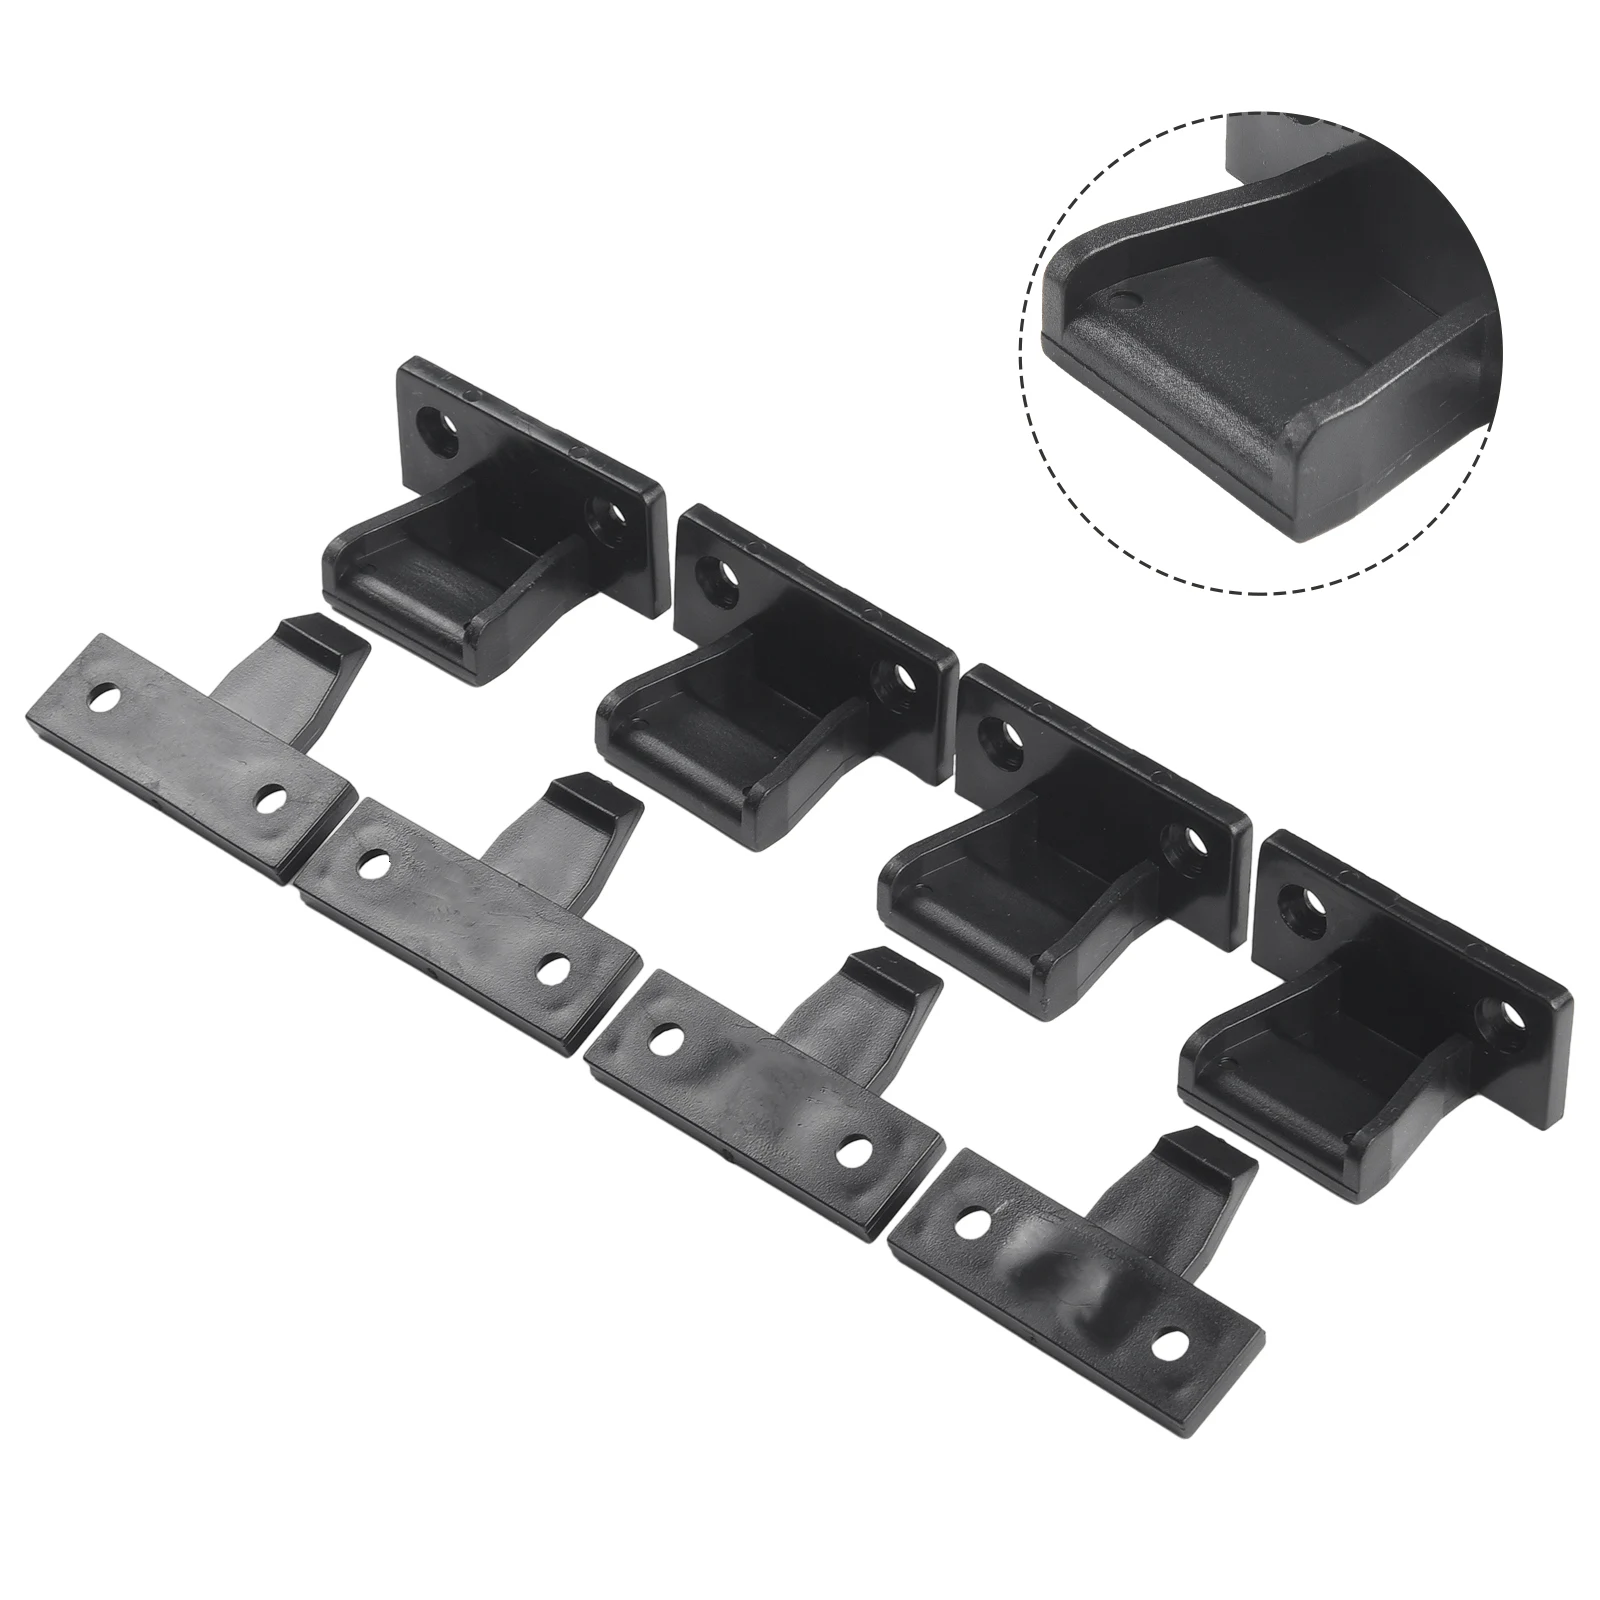 Buckle Bracket Kitchen Accessories Cabinets Home Improvement Countertops High Quality 4 Pcs ABS Plastic Brand New